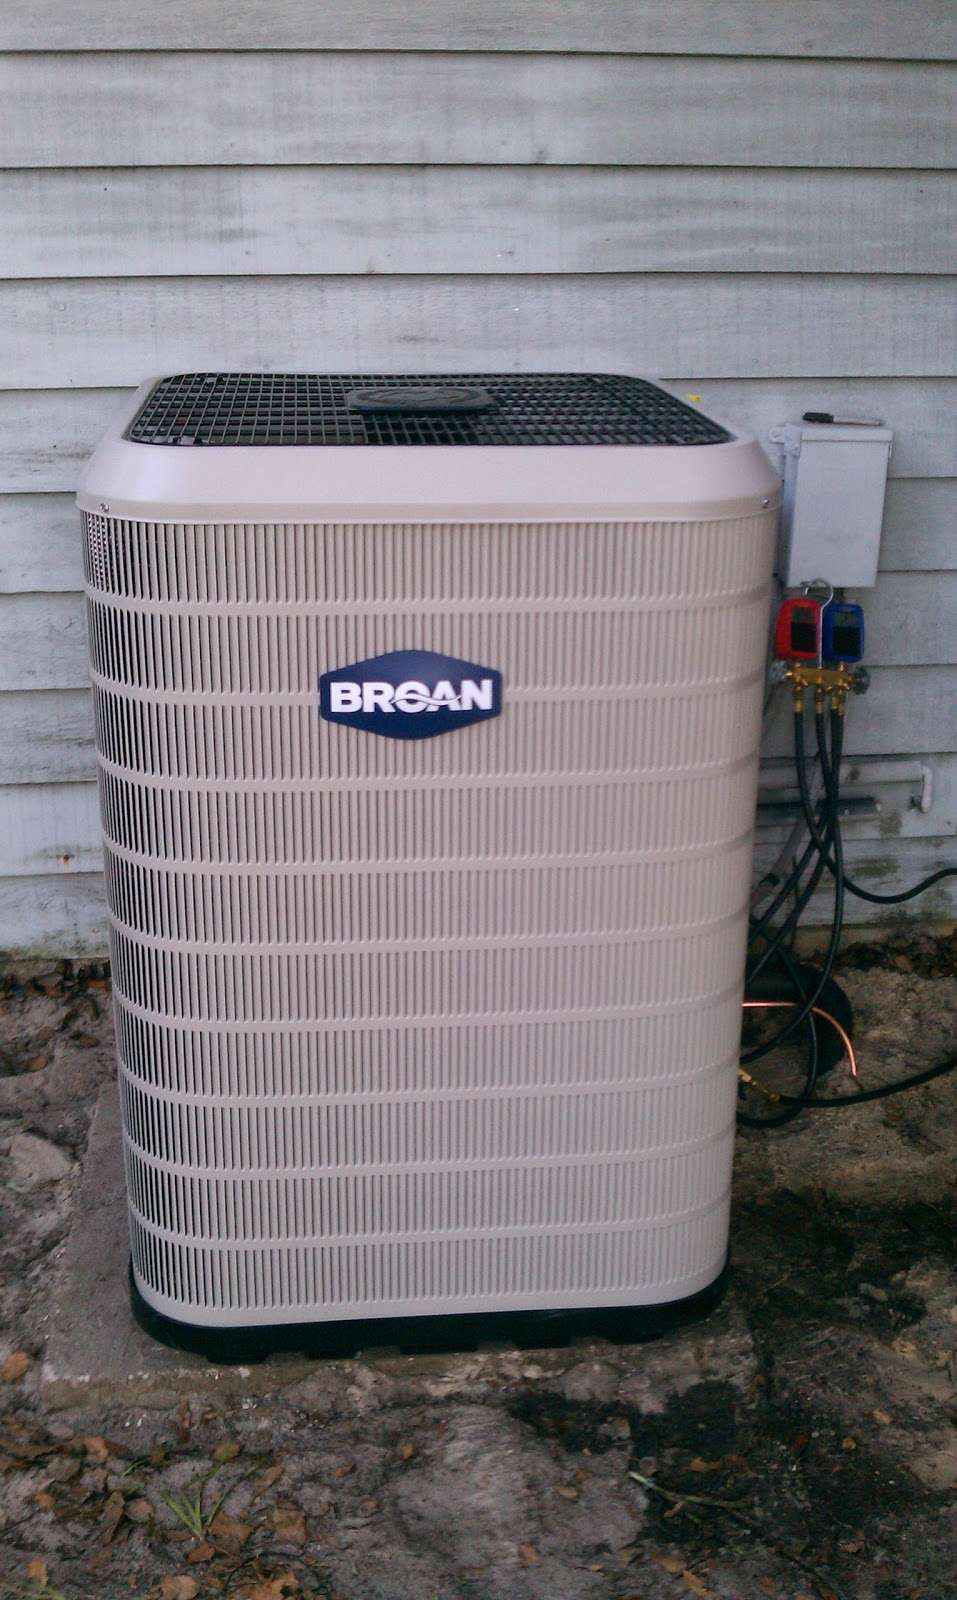 Hoffman Heating and Air,Inc. | 39 Periwinkle Dr, DeBary, FL 32713, USA | Phone: (386) 878-3961